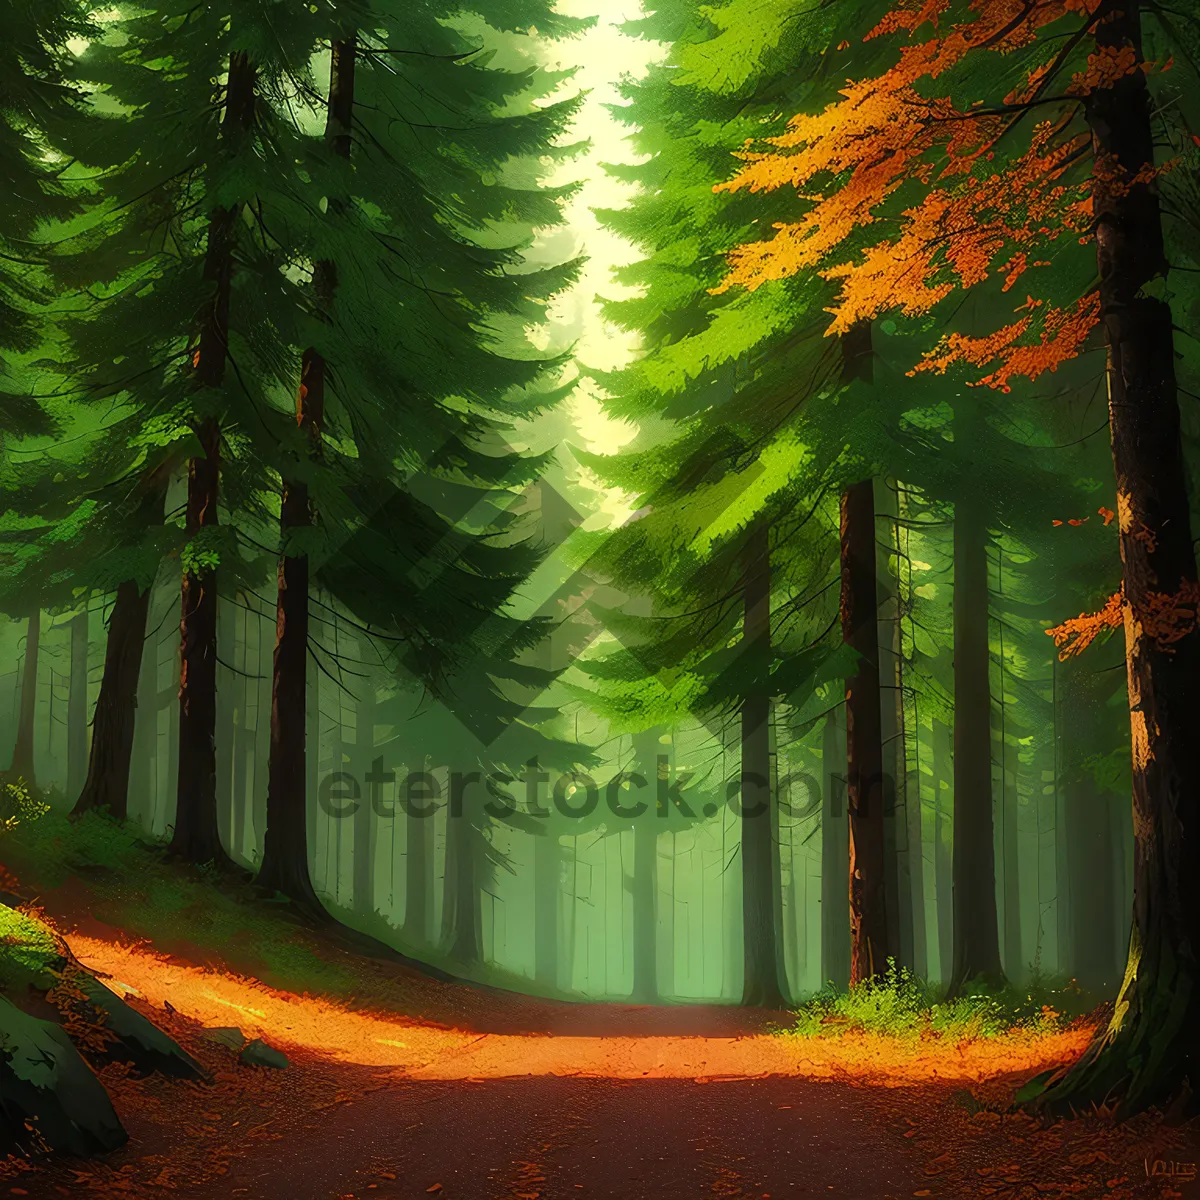 Picture of Serene Summer Forest Path with Sunlit Trees